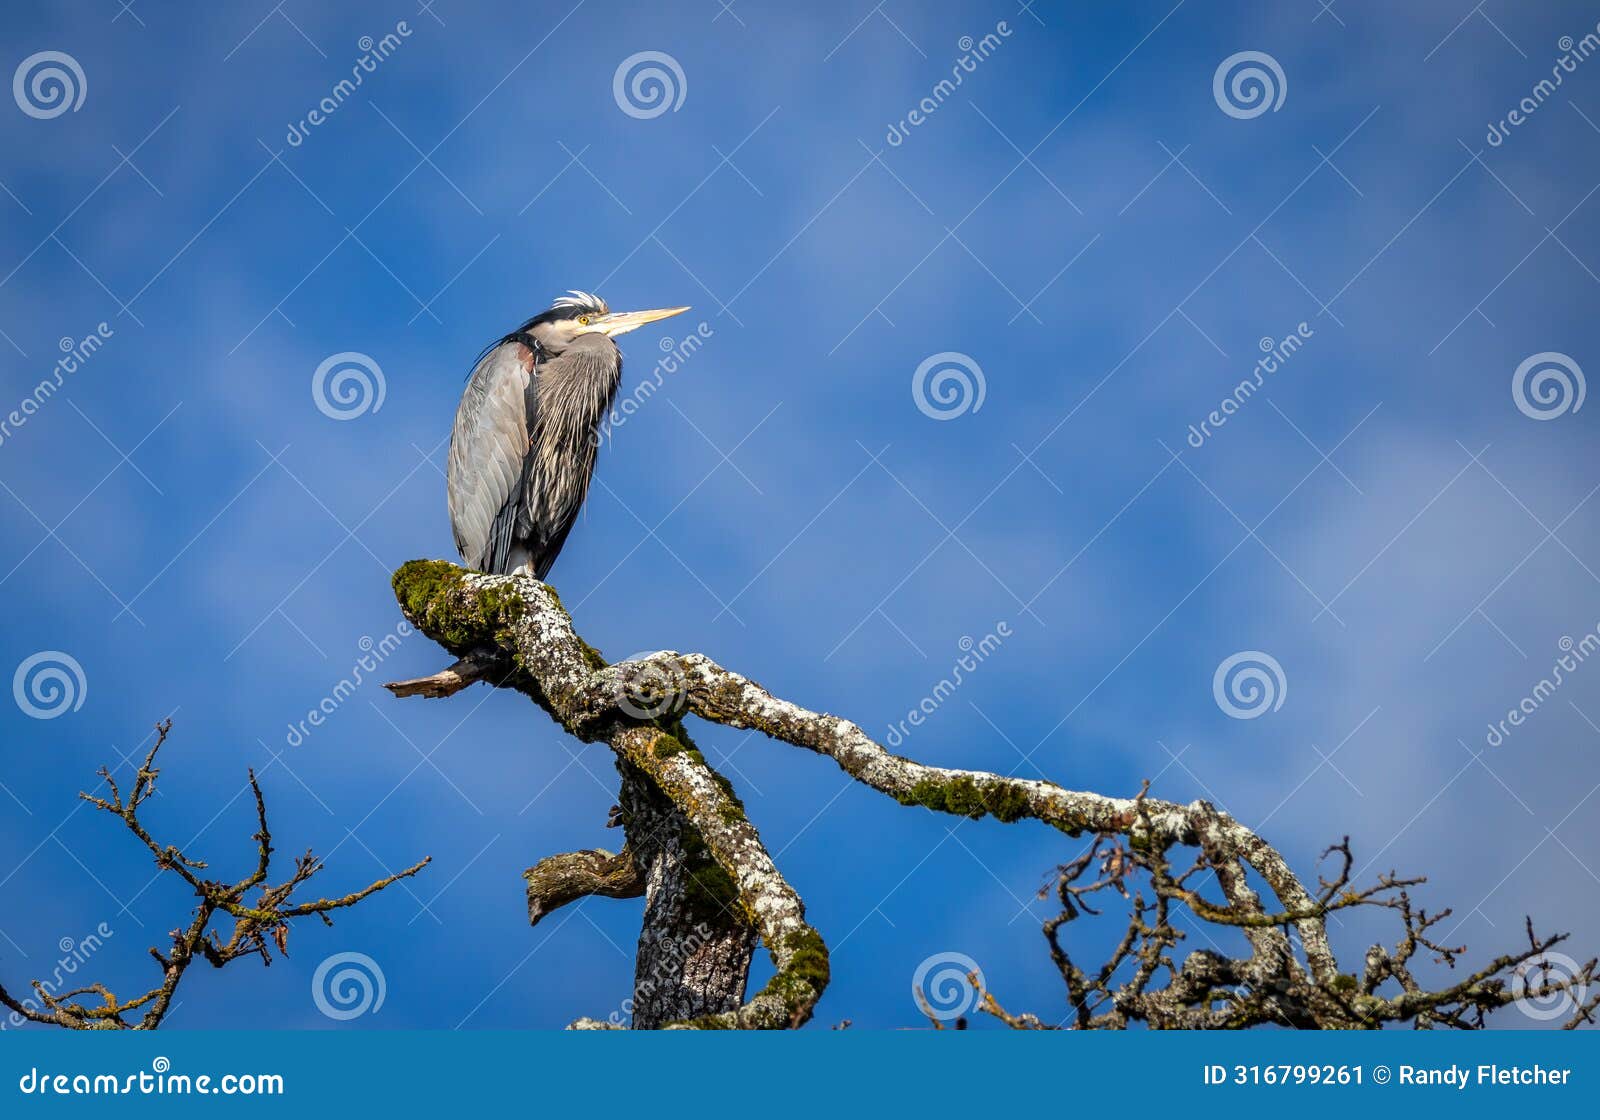 a great blue heron 